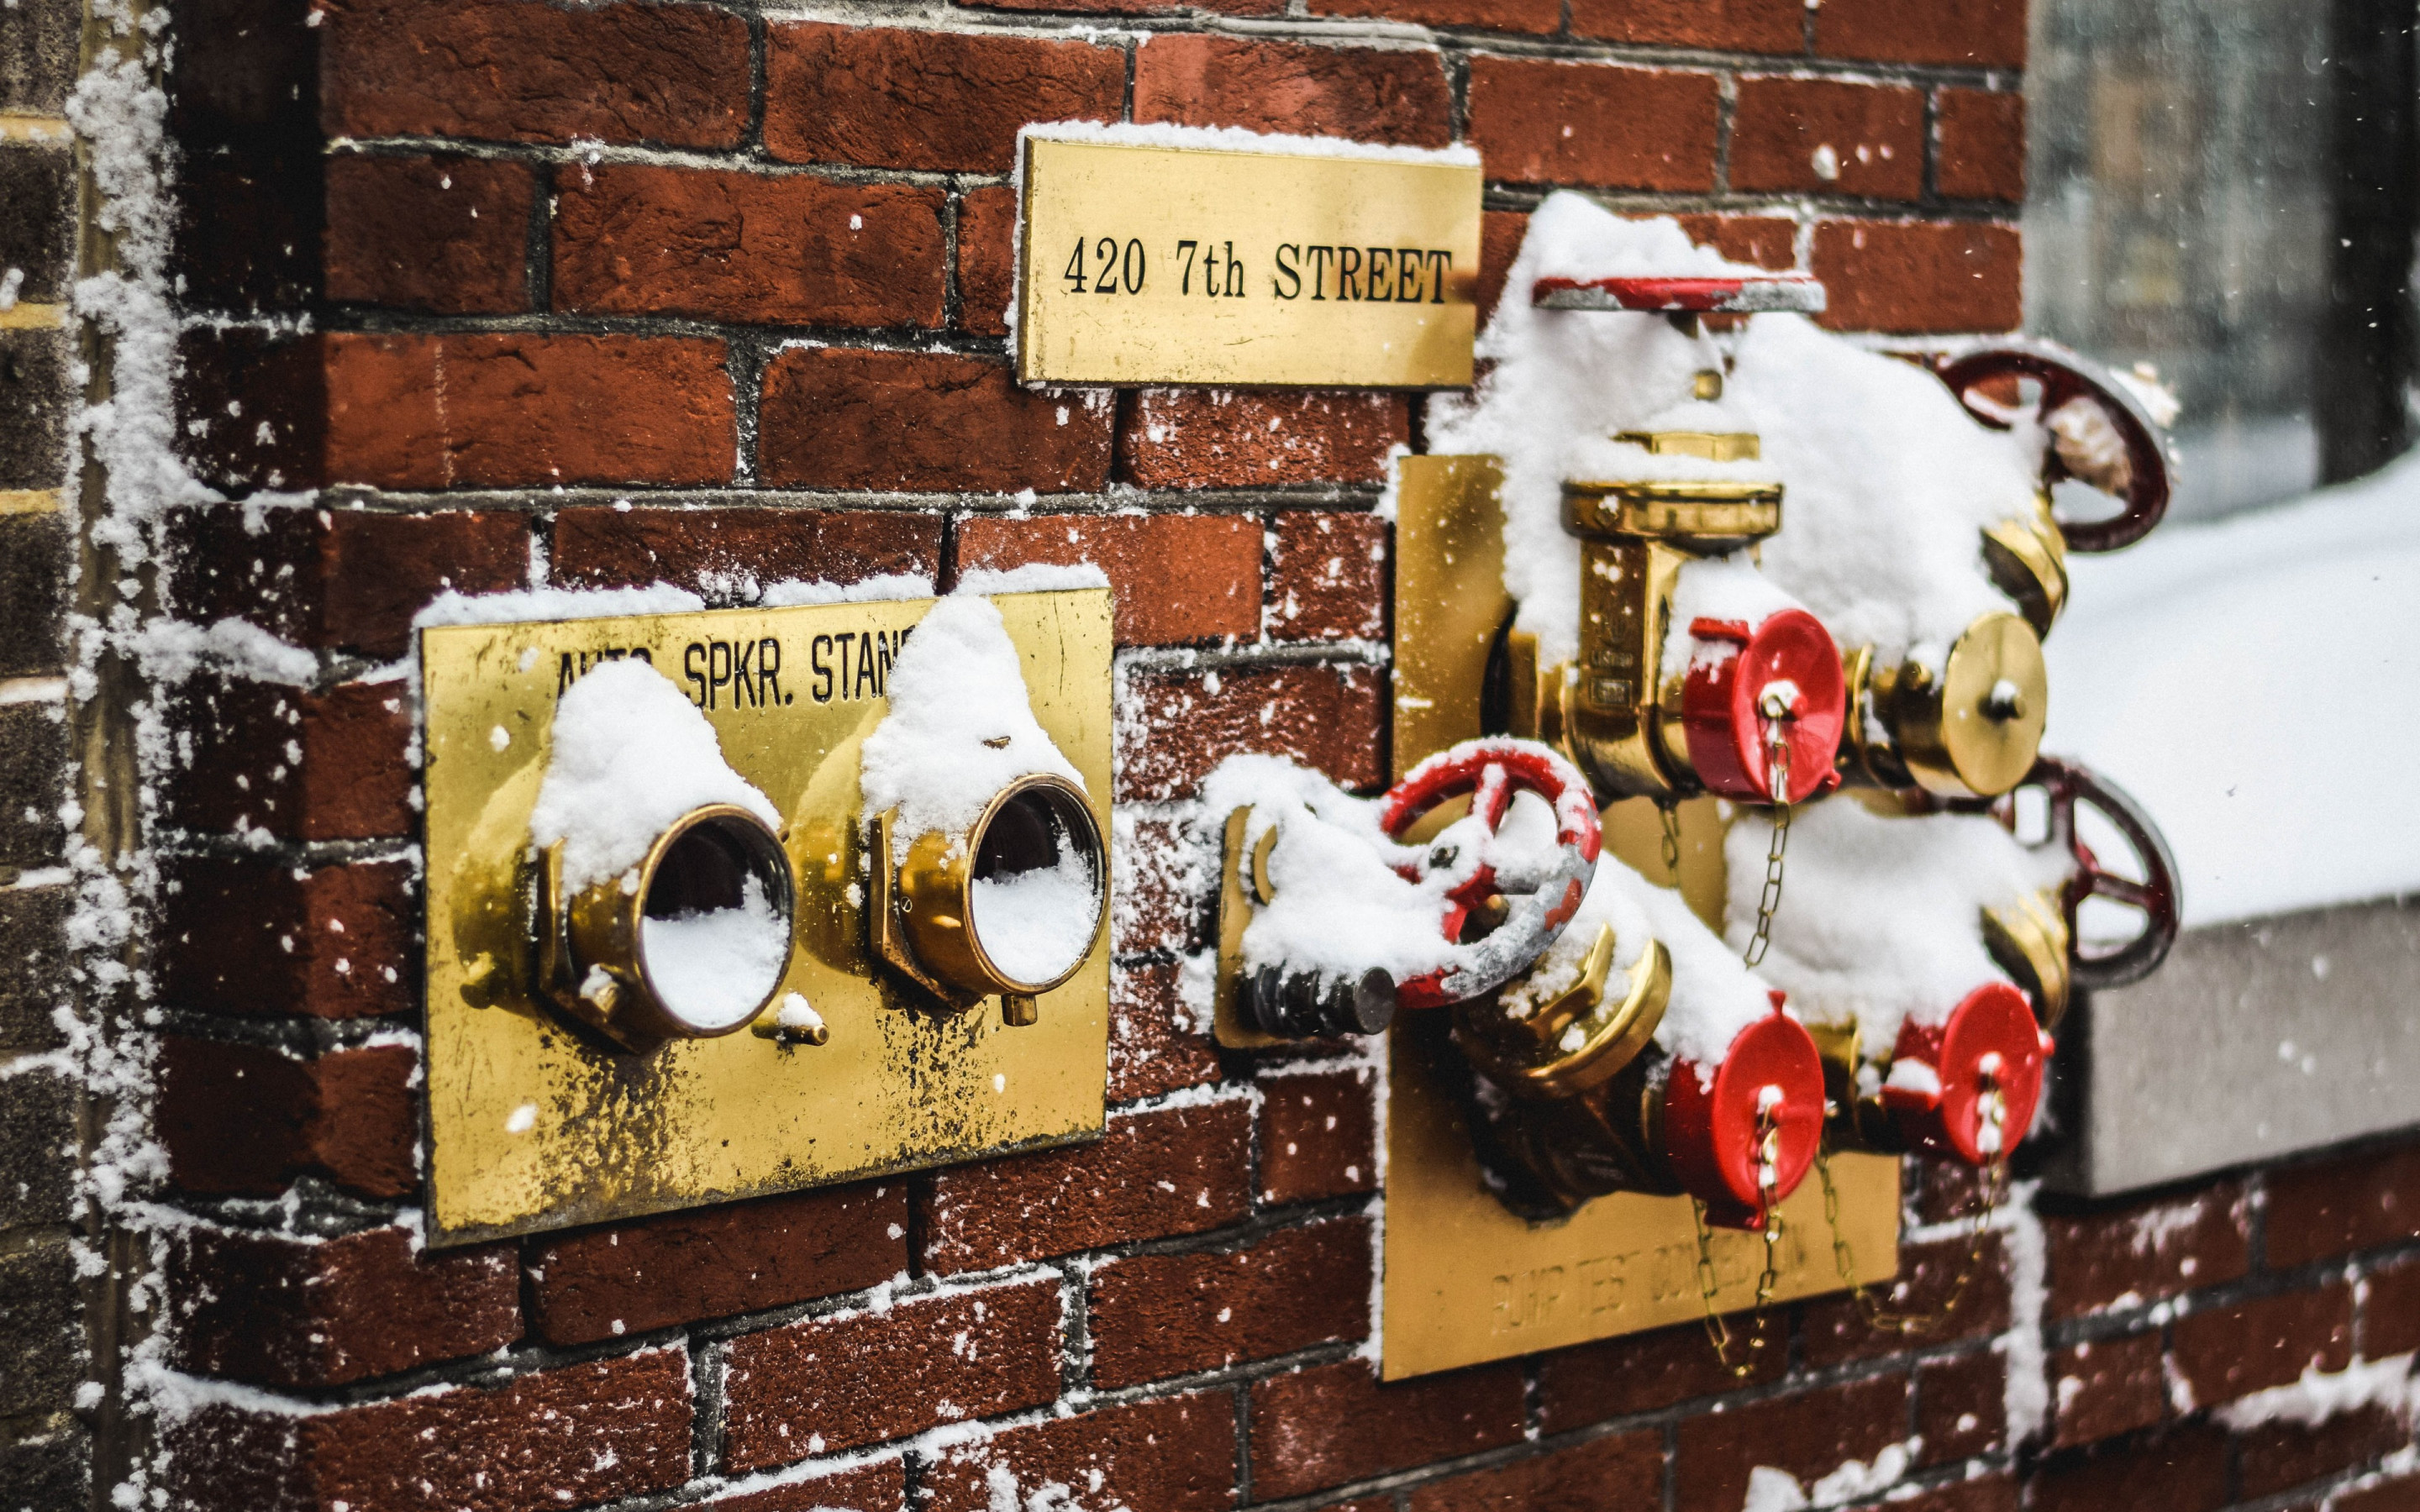 Snow covered fire standpipes in Washington wallpaper 2880x1800